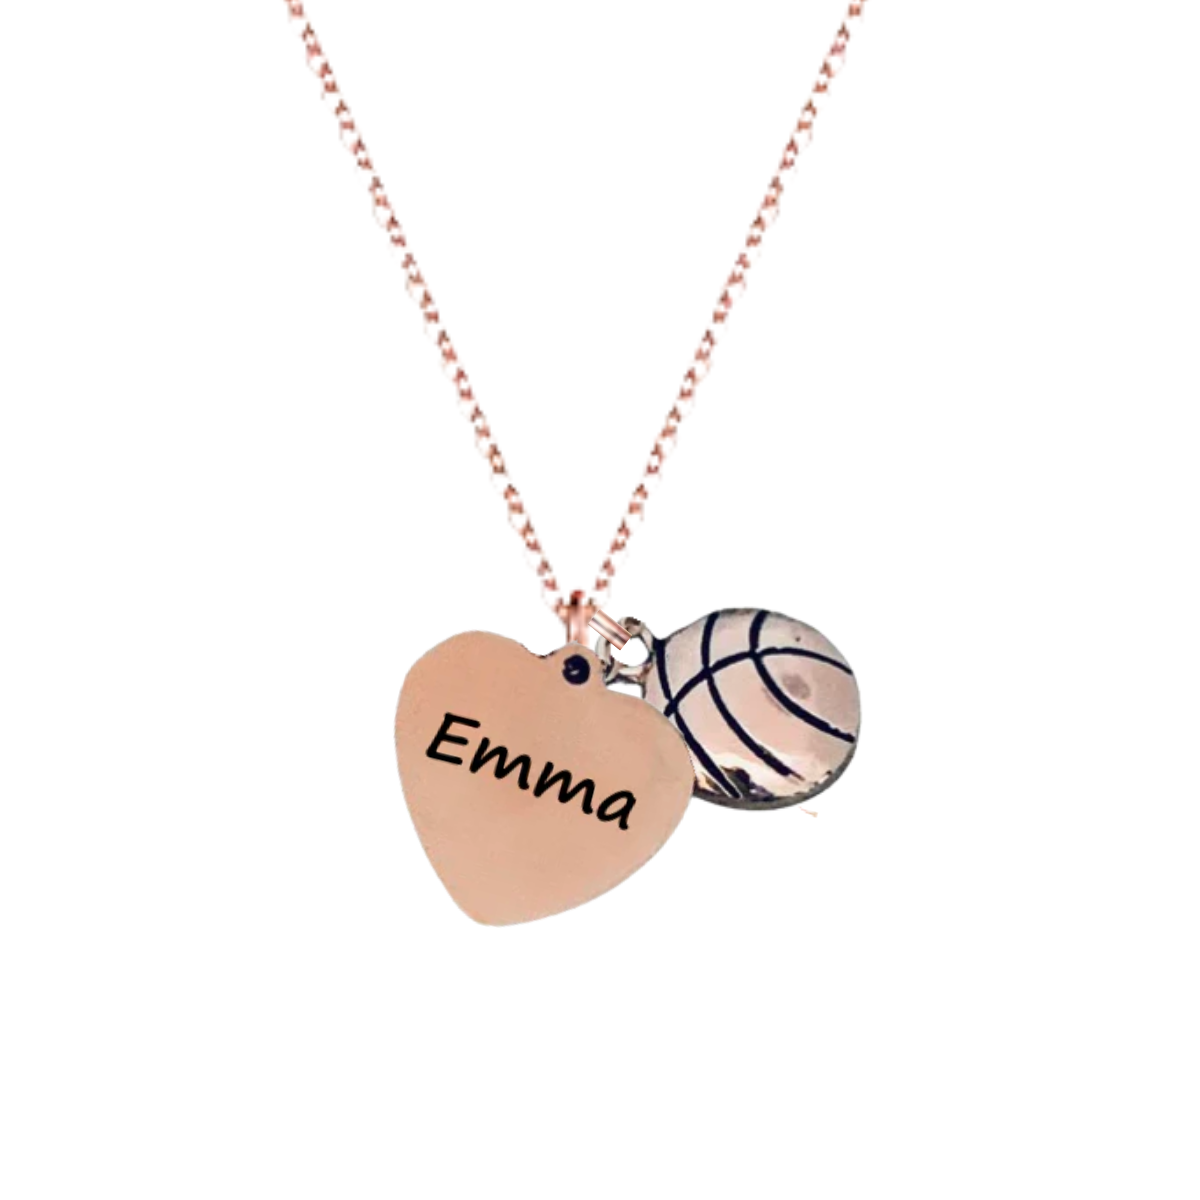 Hand Stamped Personalized Basketball Necklace Girls Basketball Necklace  Birthstone Necklace Basketball Gift for Girls - Etsy | Basketball necklace,  Hand stamped, Gifts for girls